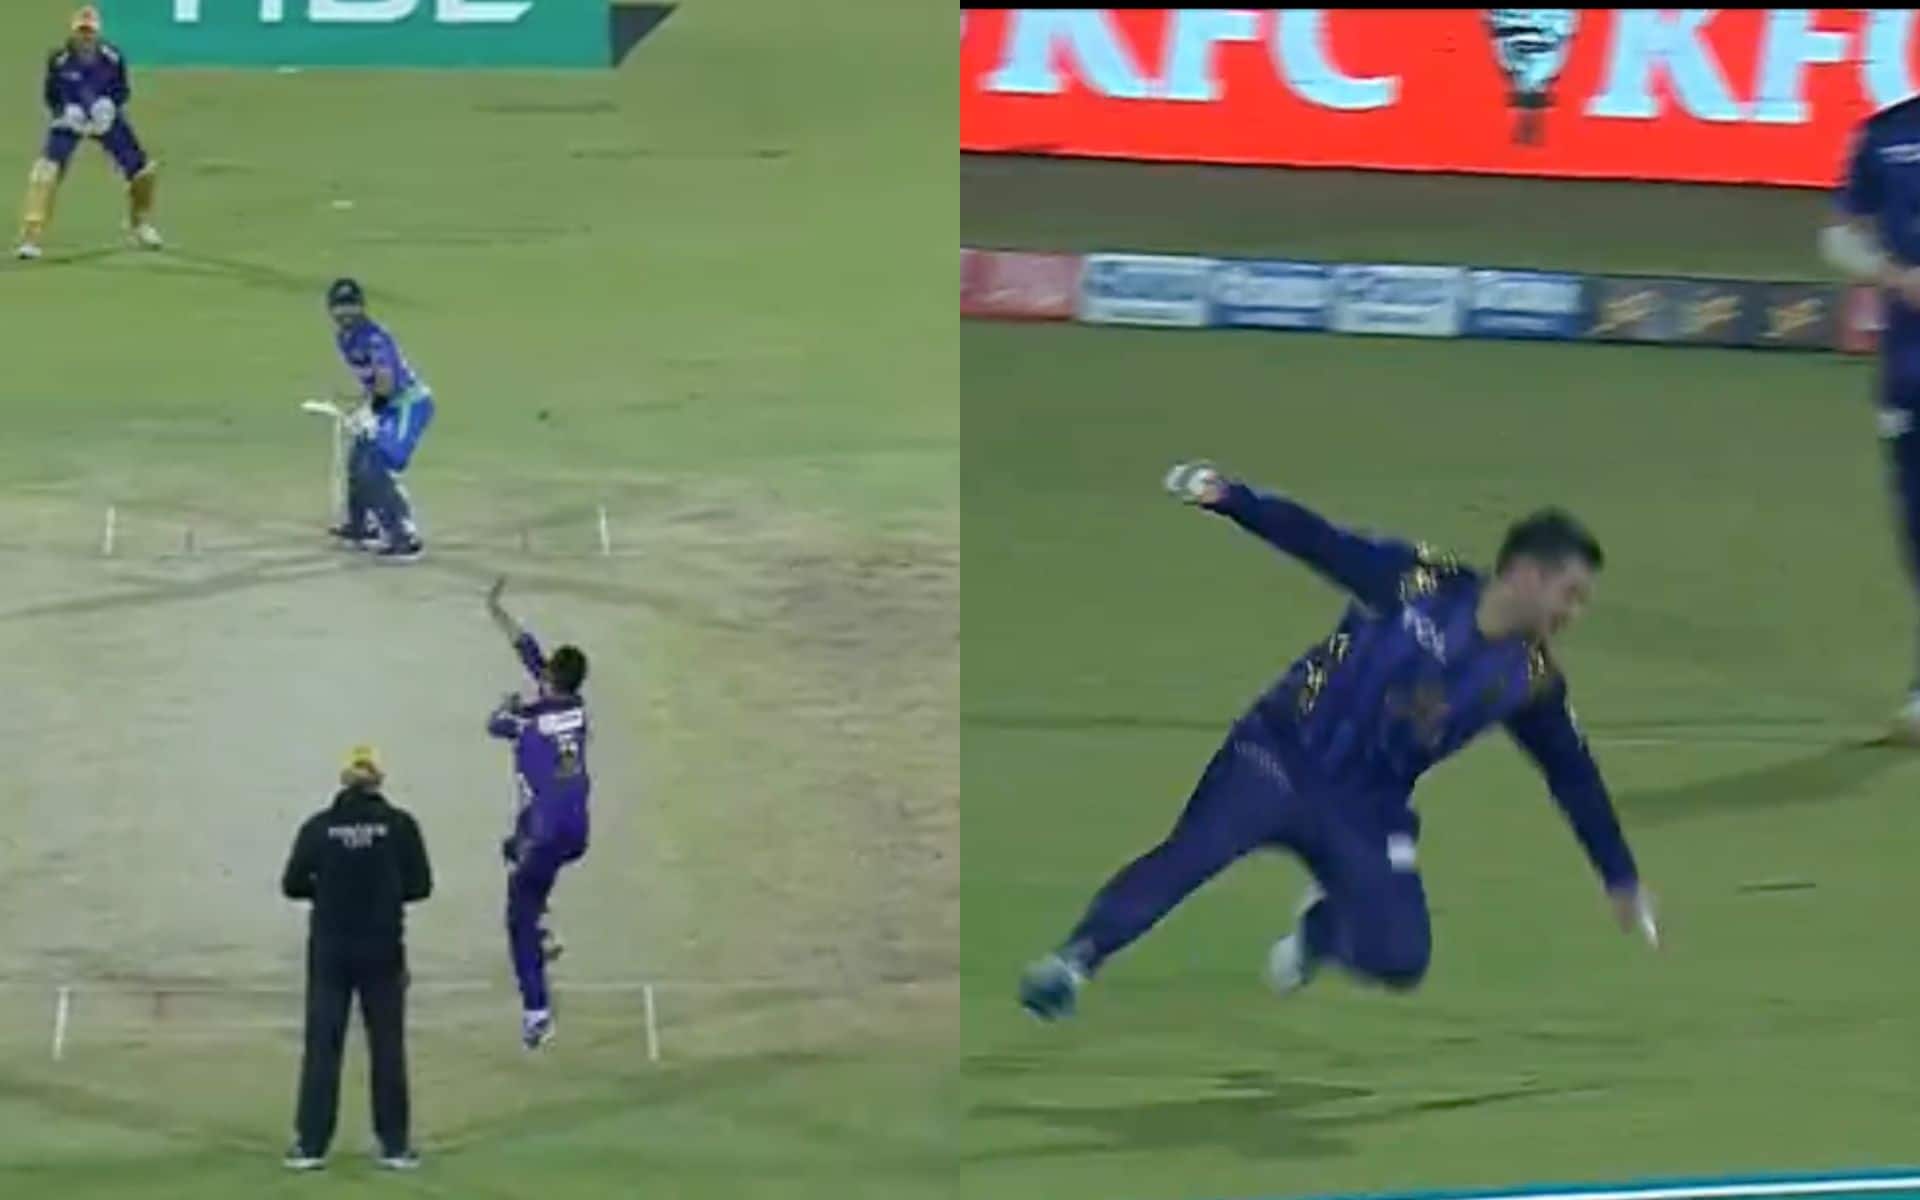 Rilee Rossouw catches an incredible catch off Rizwan (X.com)